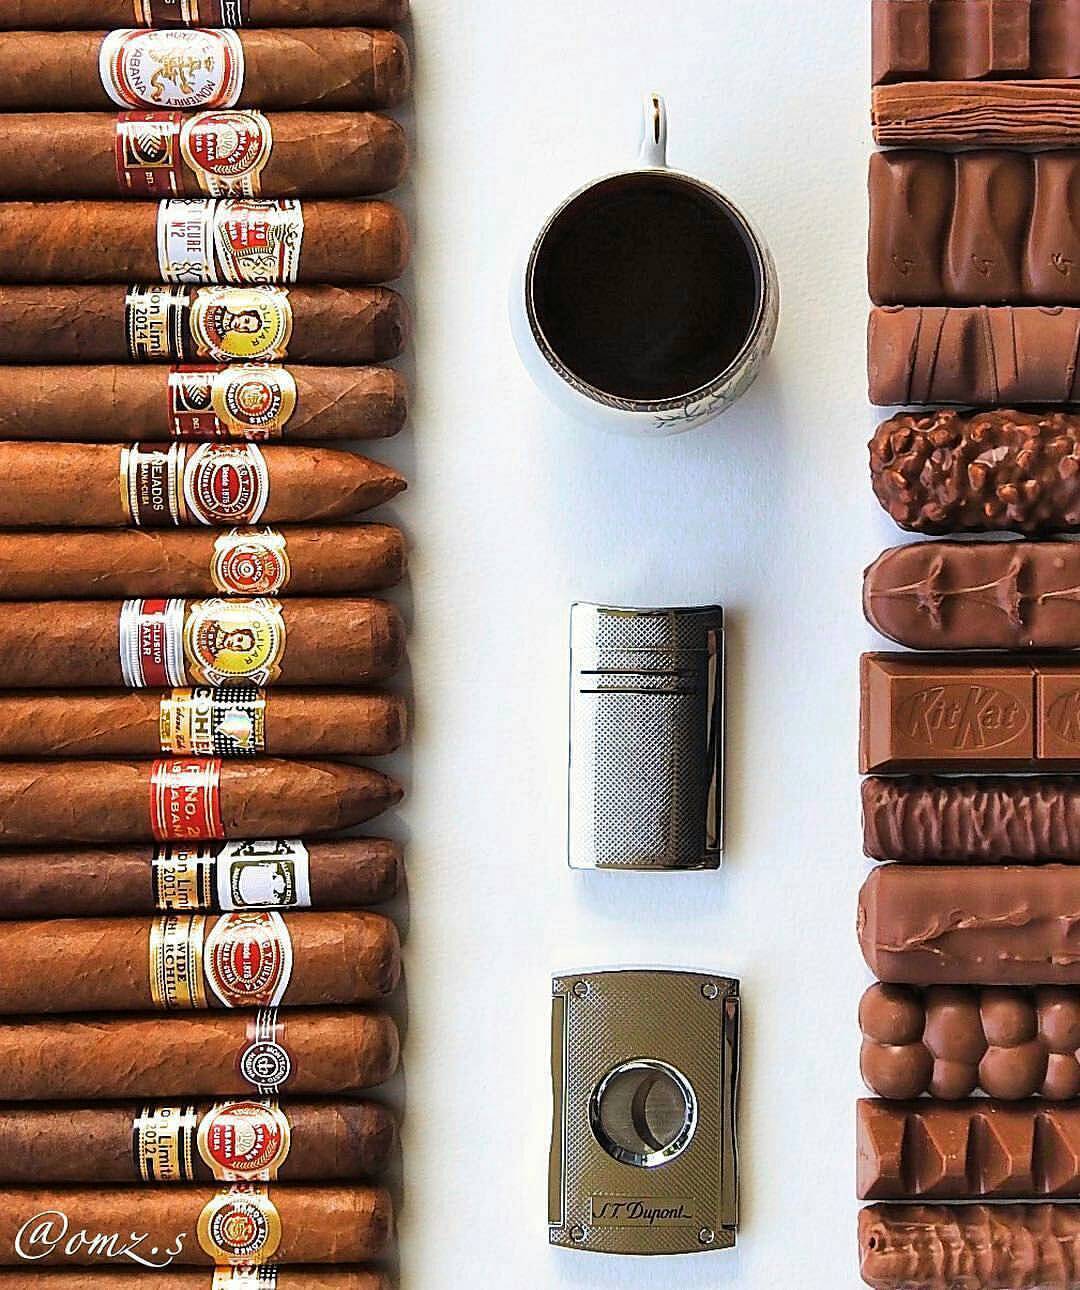 👌🔥💨🍫
Breakfast!
#Repost 📸 from @omz.s
WWW.CIGARSANDWHISKEYS.COM
Like 👍, Repost 🔃, Tag 🔖 Follow 👣 Us & Subscribe ✍ on👇:...